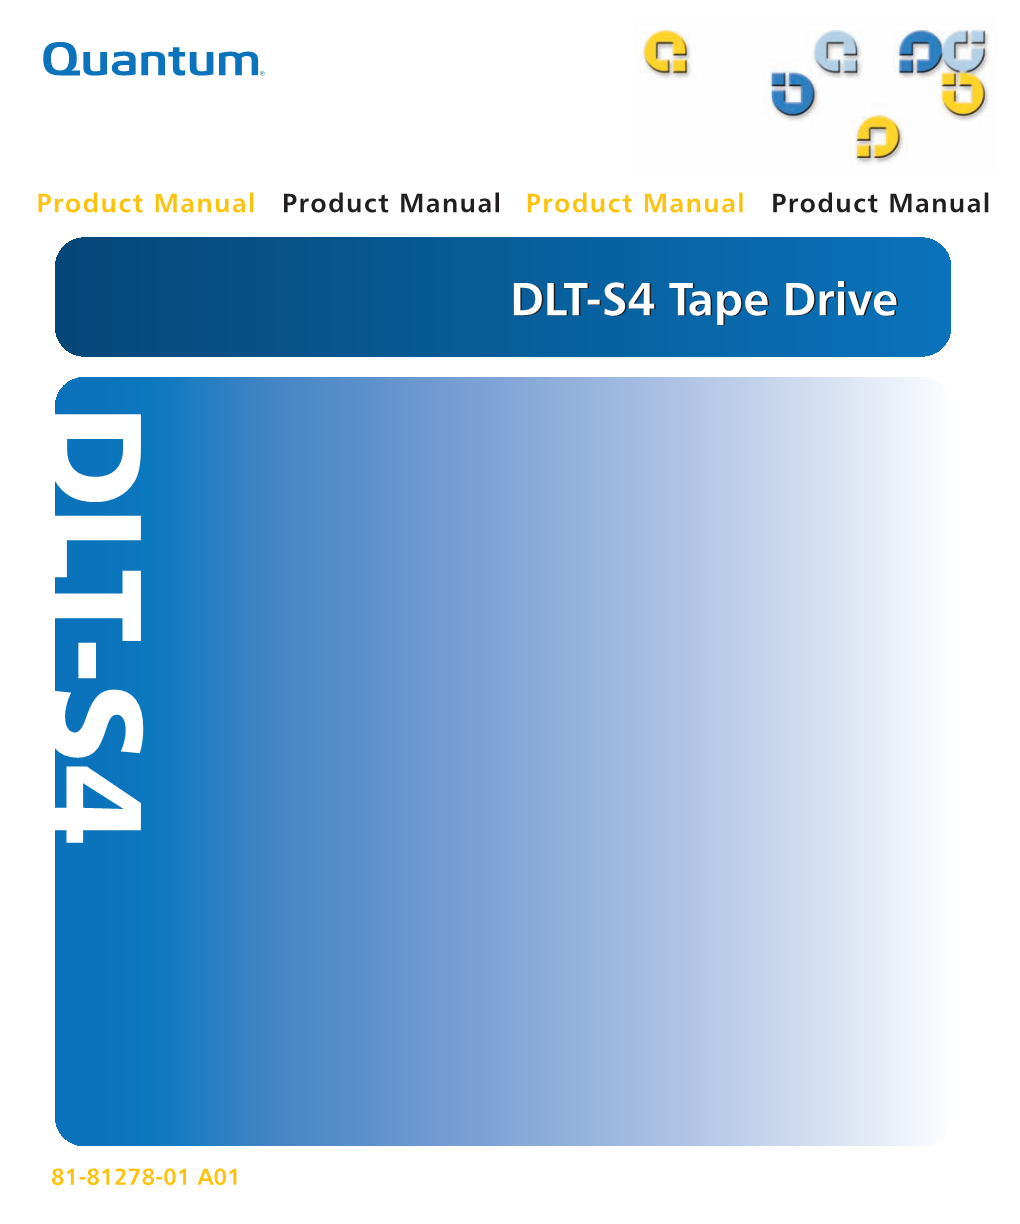 DLT-S4 Product Manual, 81-81278-01 A01, July 2006, Made in USA